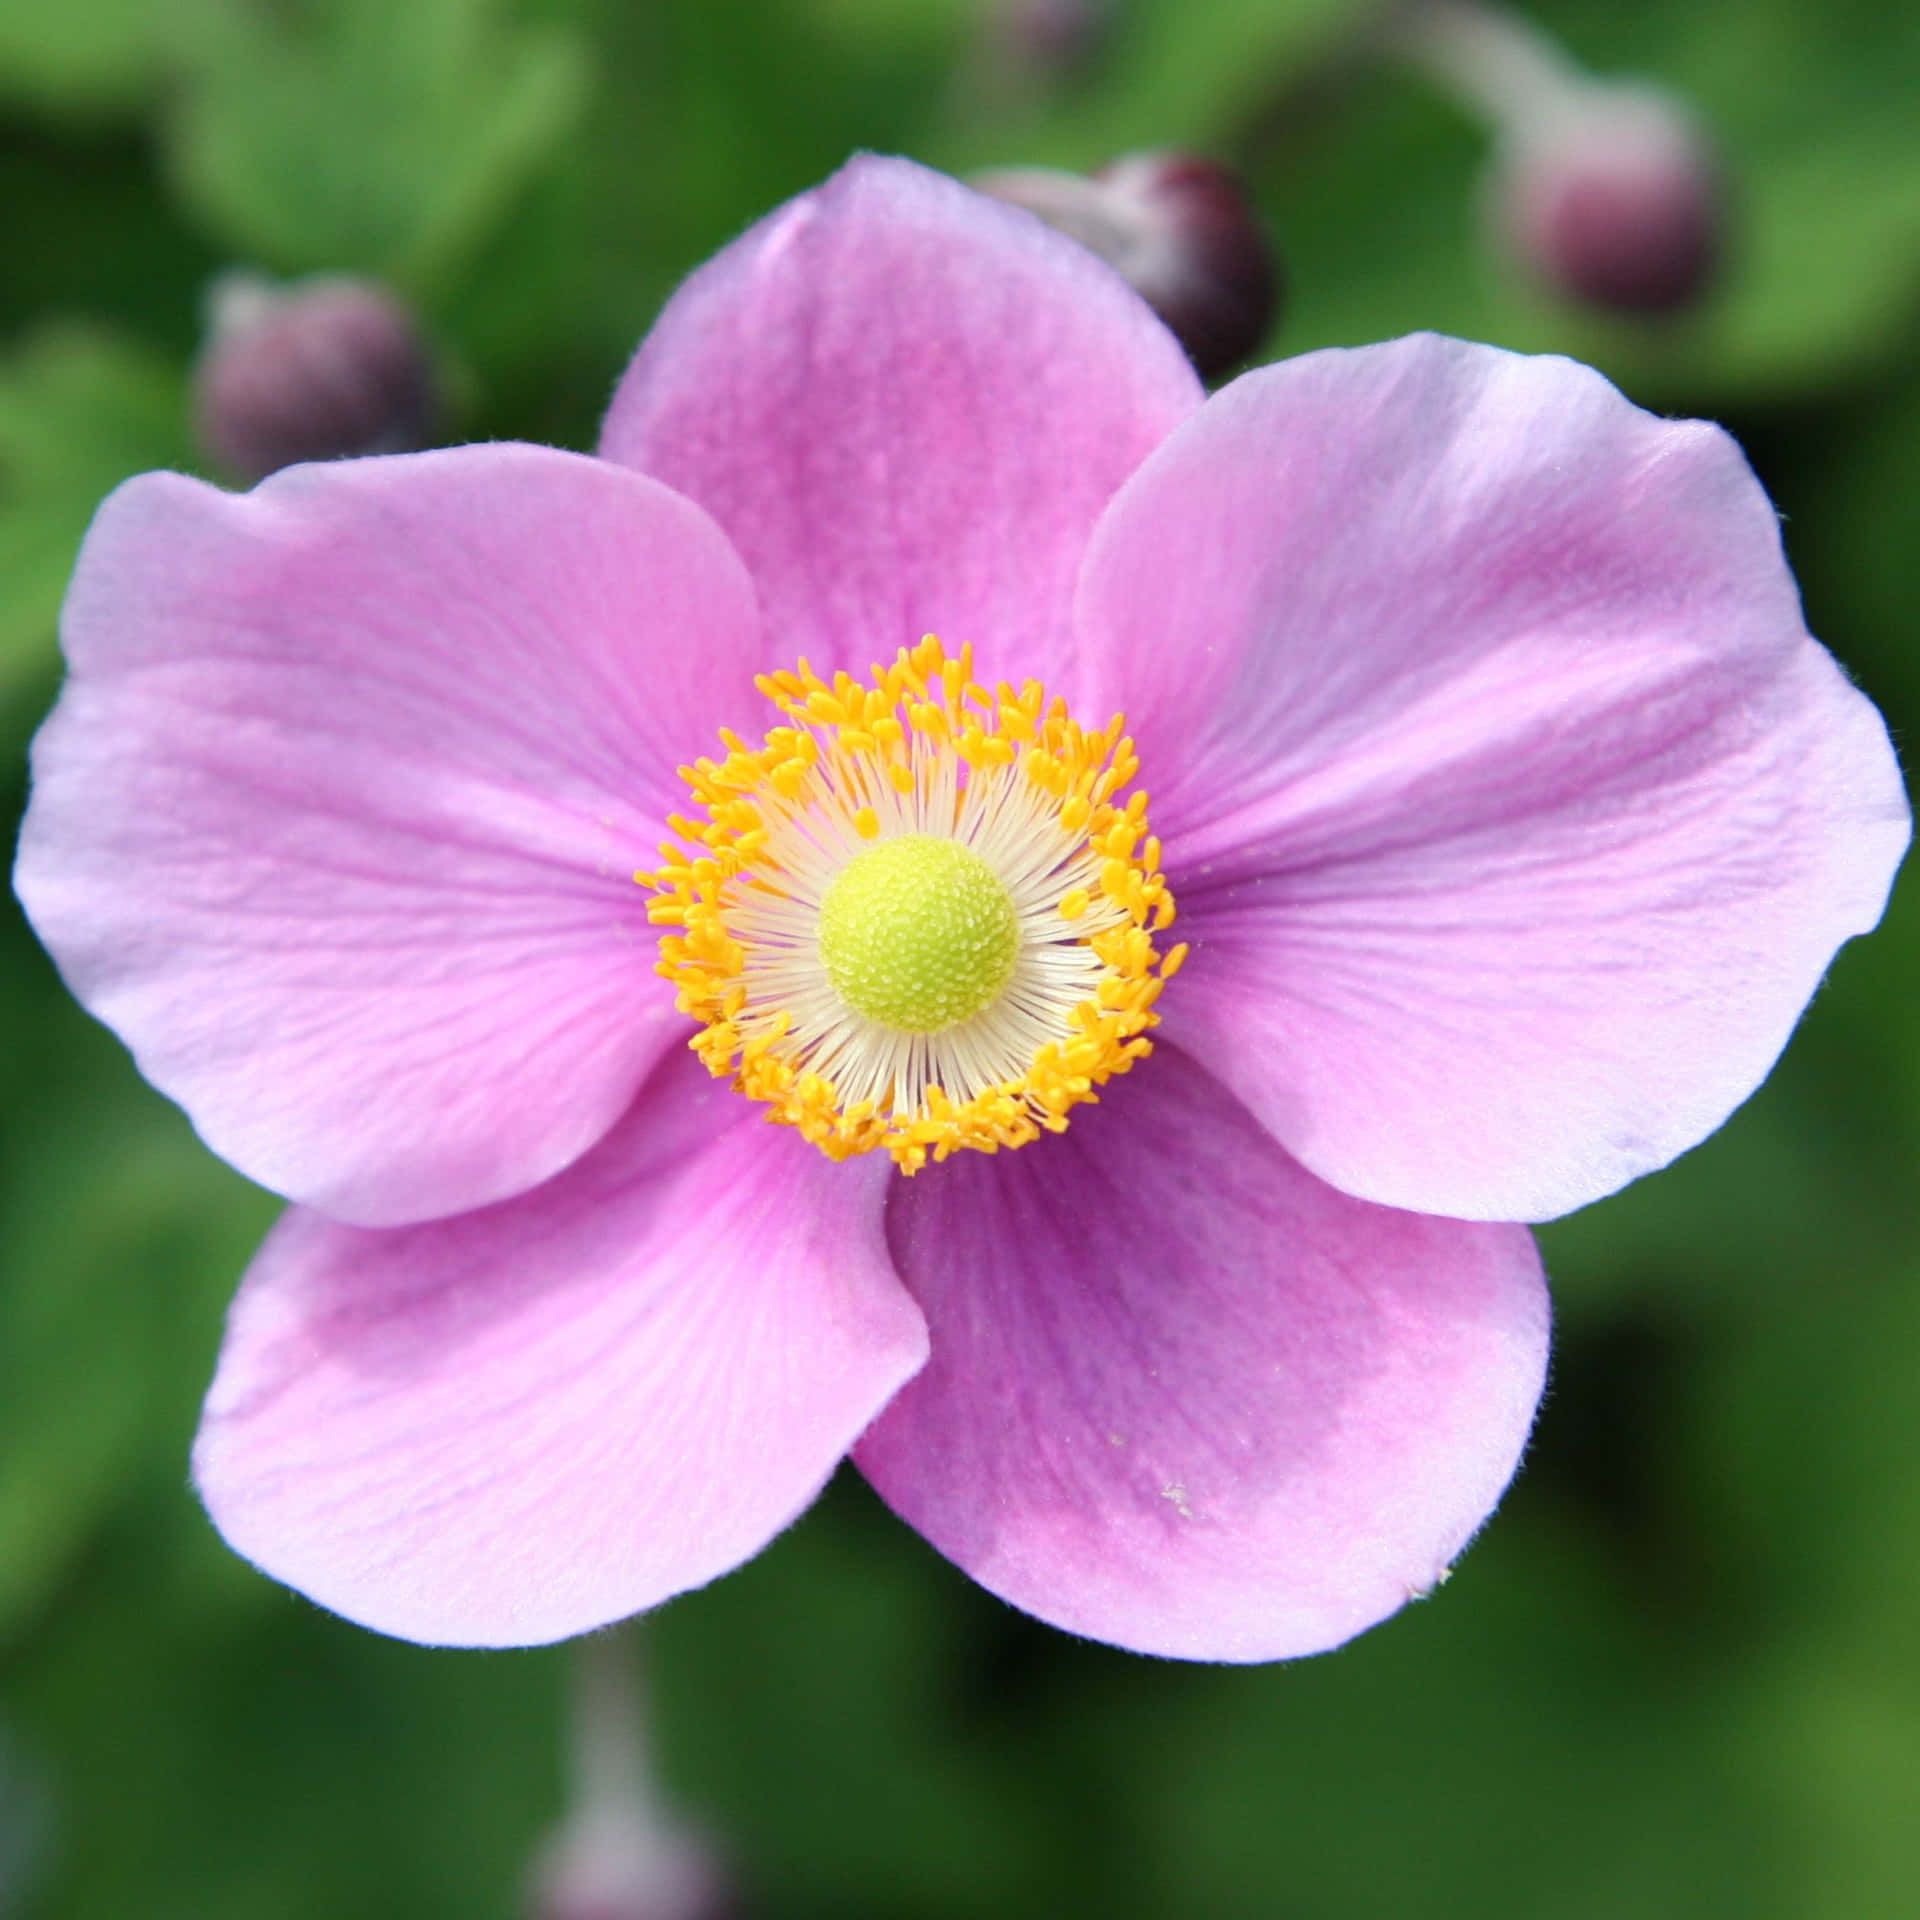 A Brilliant Anemone Flower Sets the Ground Aglow with Beauty